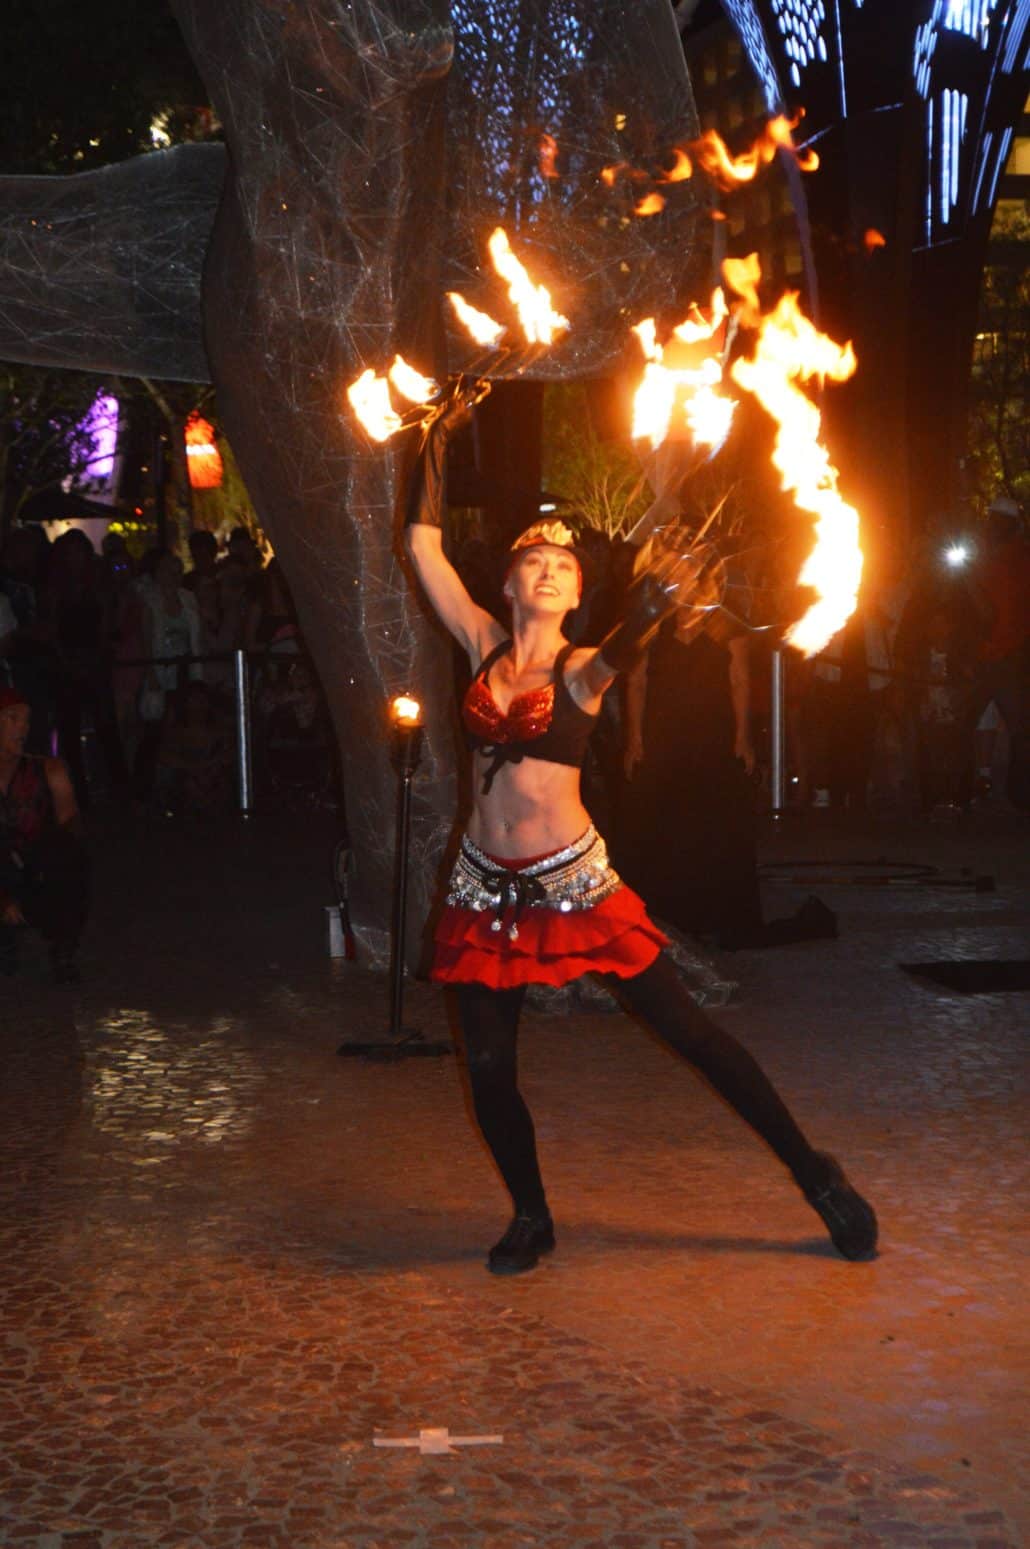 A performer at the “Bliss Dance” lighting ceremony in The Park